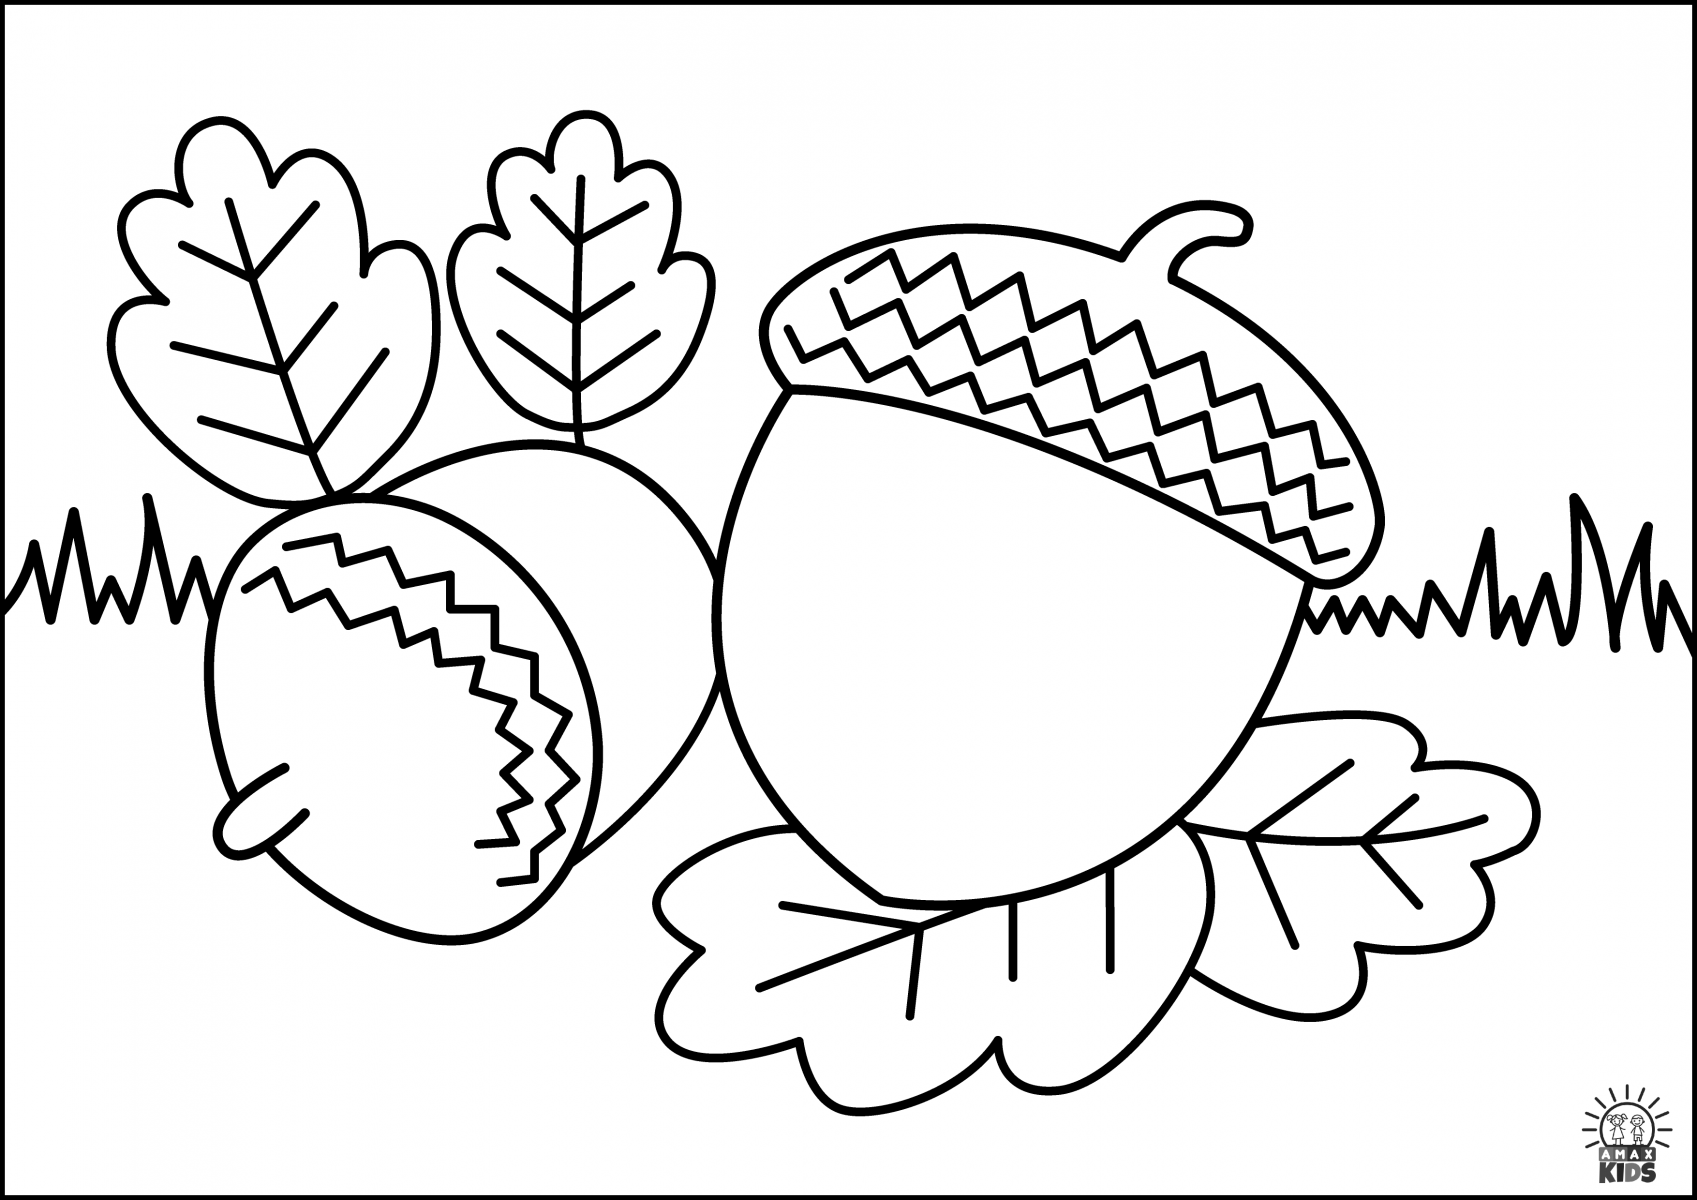 Acorn Coloring Pages To Print Coloring Pages